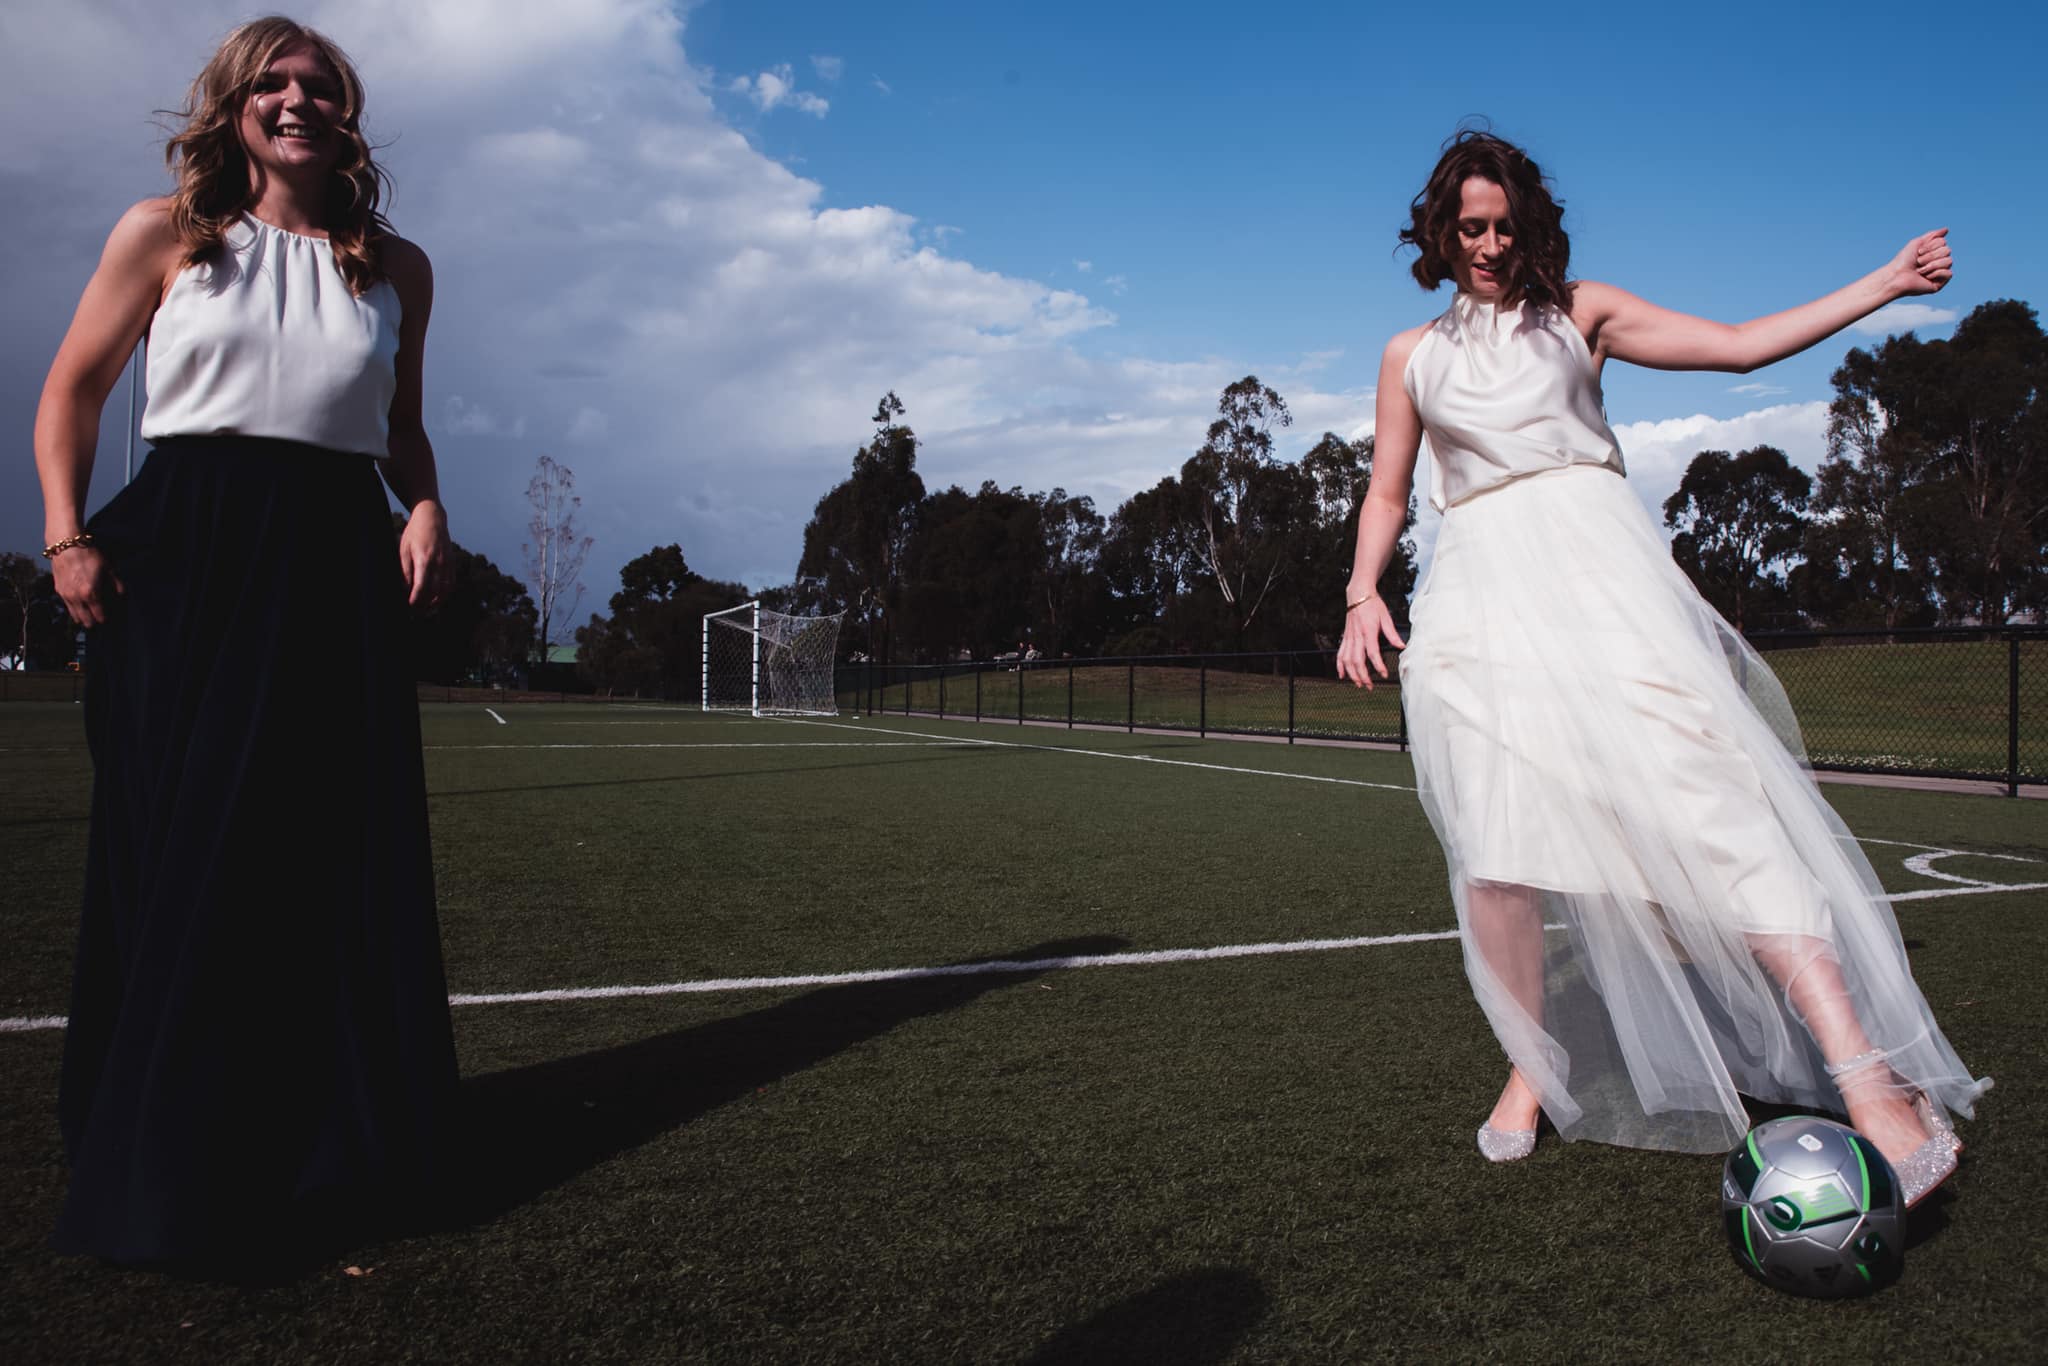 Audrey is in her wedding dress on the right, kicking a soccer ball. Keryn is to the left, smiling. They are at Clifton Park.